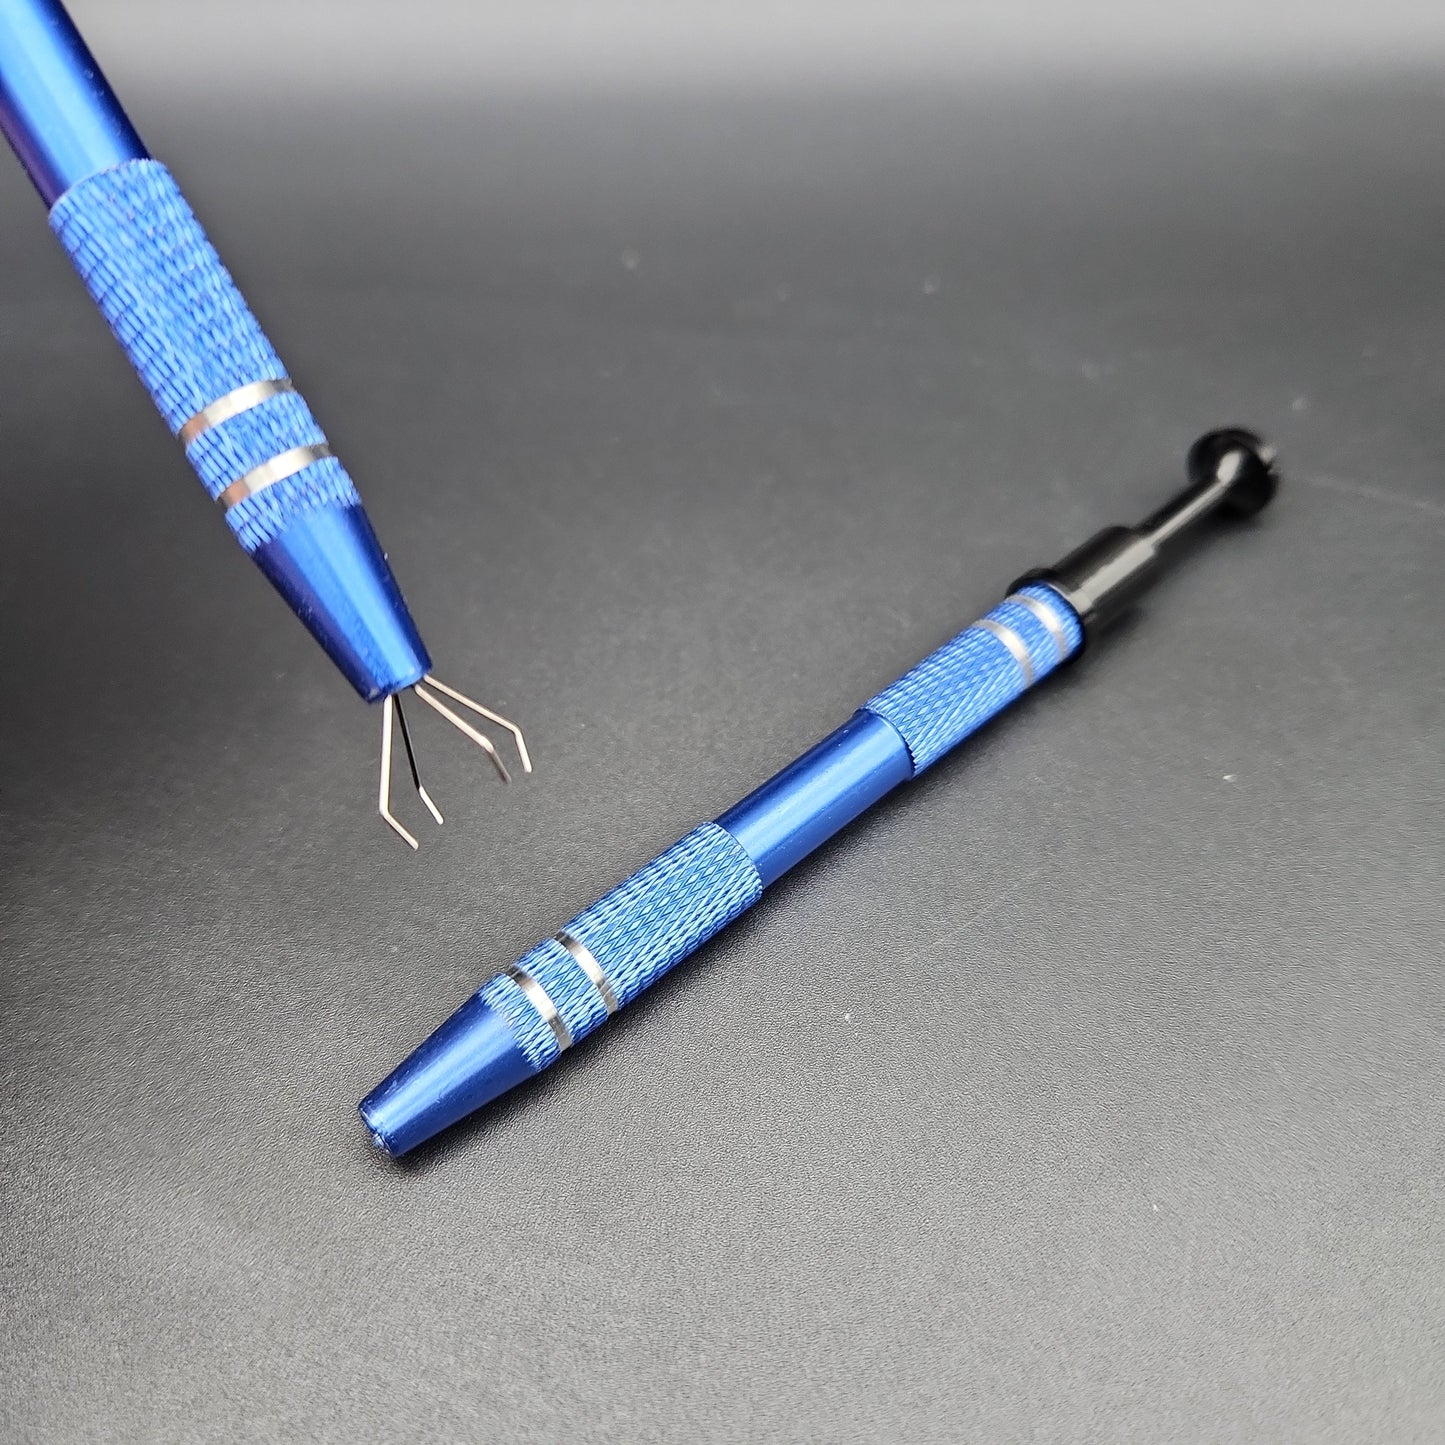 4 Prong Claw Grabber Dab Tool - blue